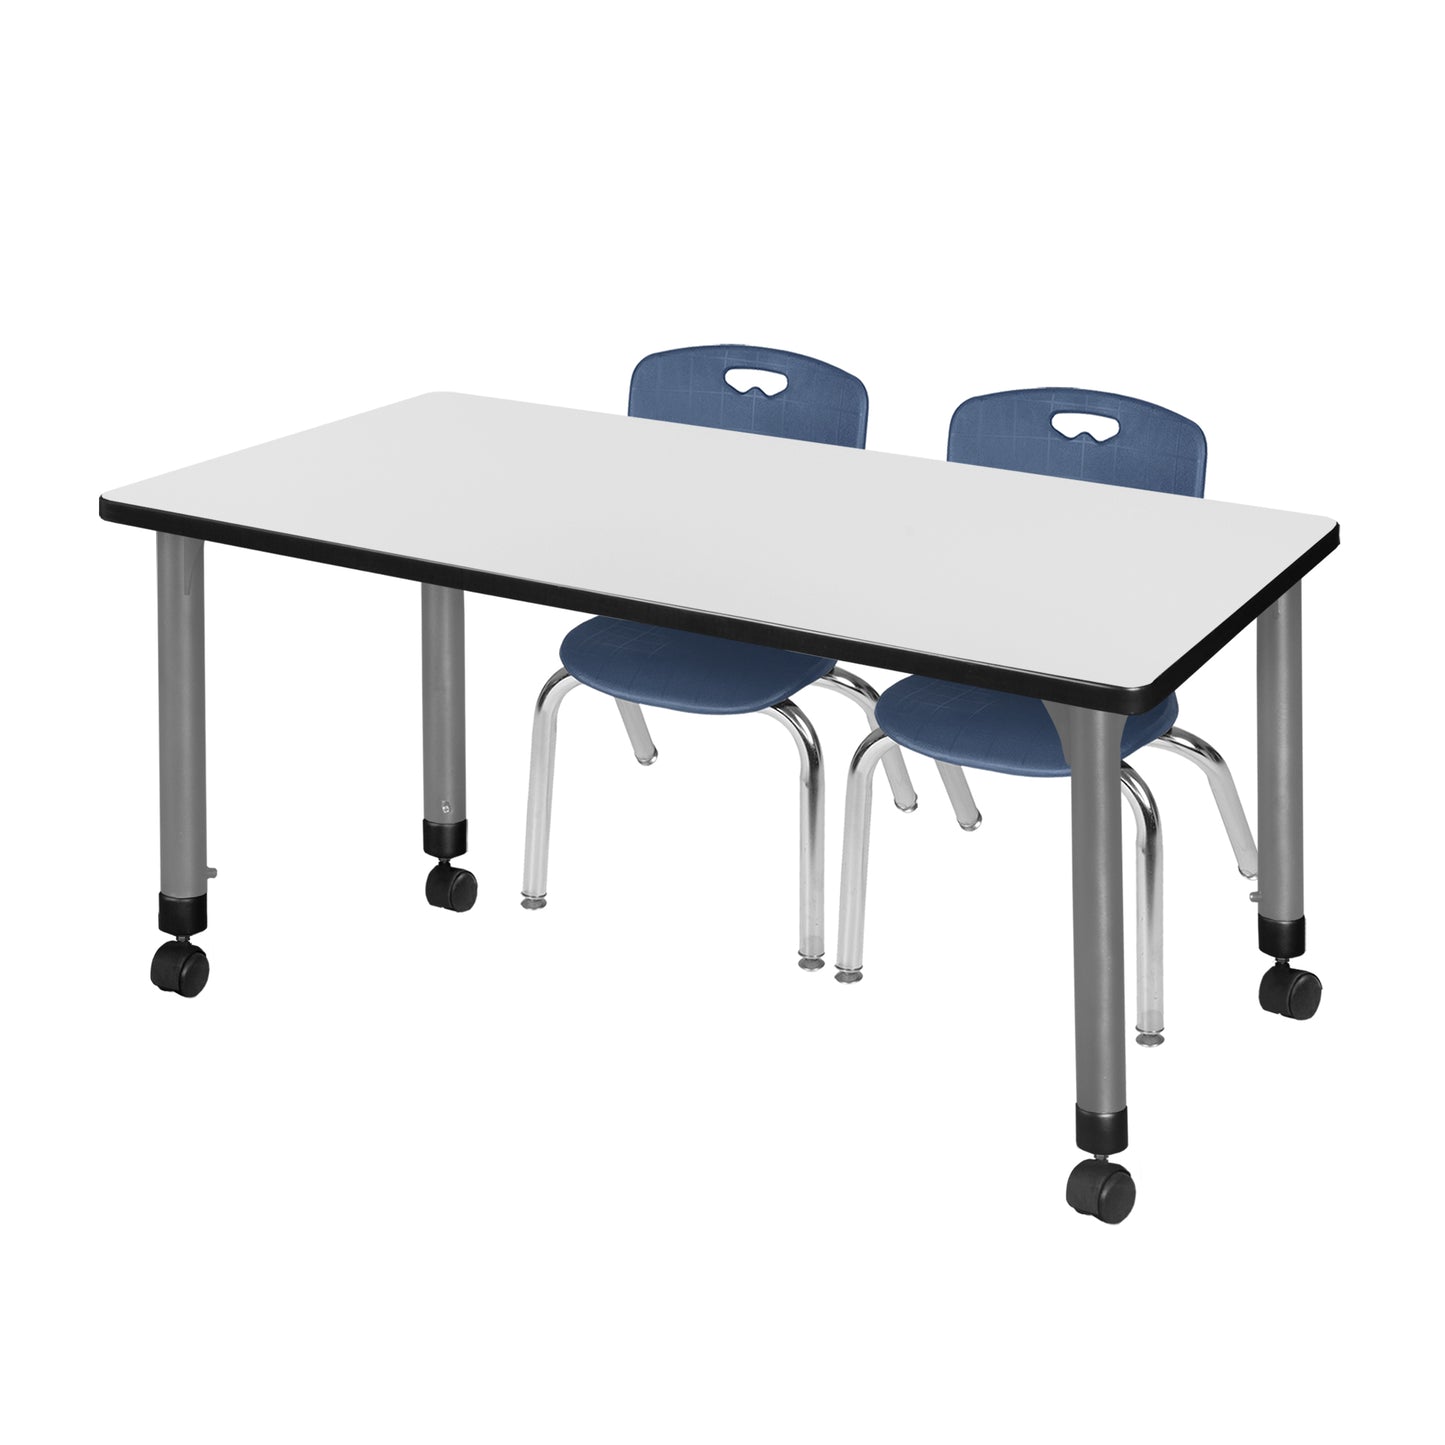 Regency Kee 48 x 24 in. Adjustable Classroom Table & 2 Andy 12 in. Stack Chairs